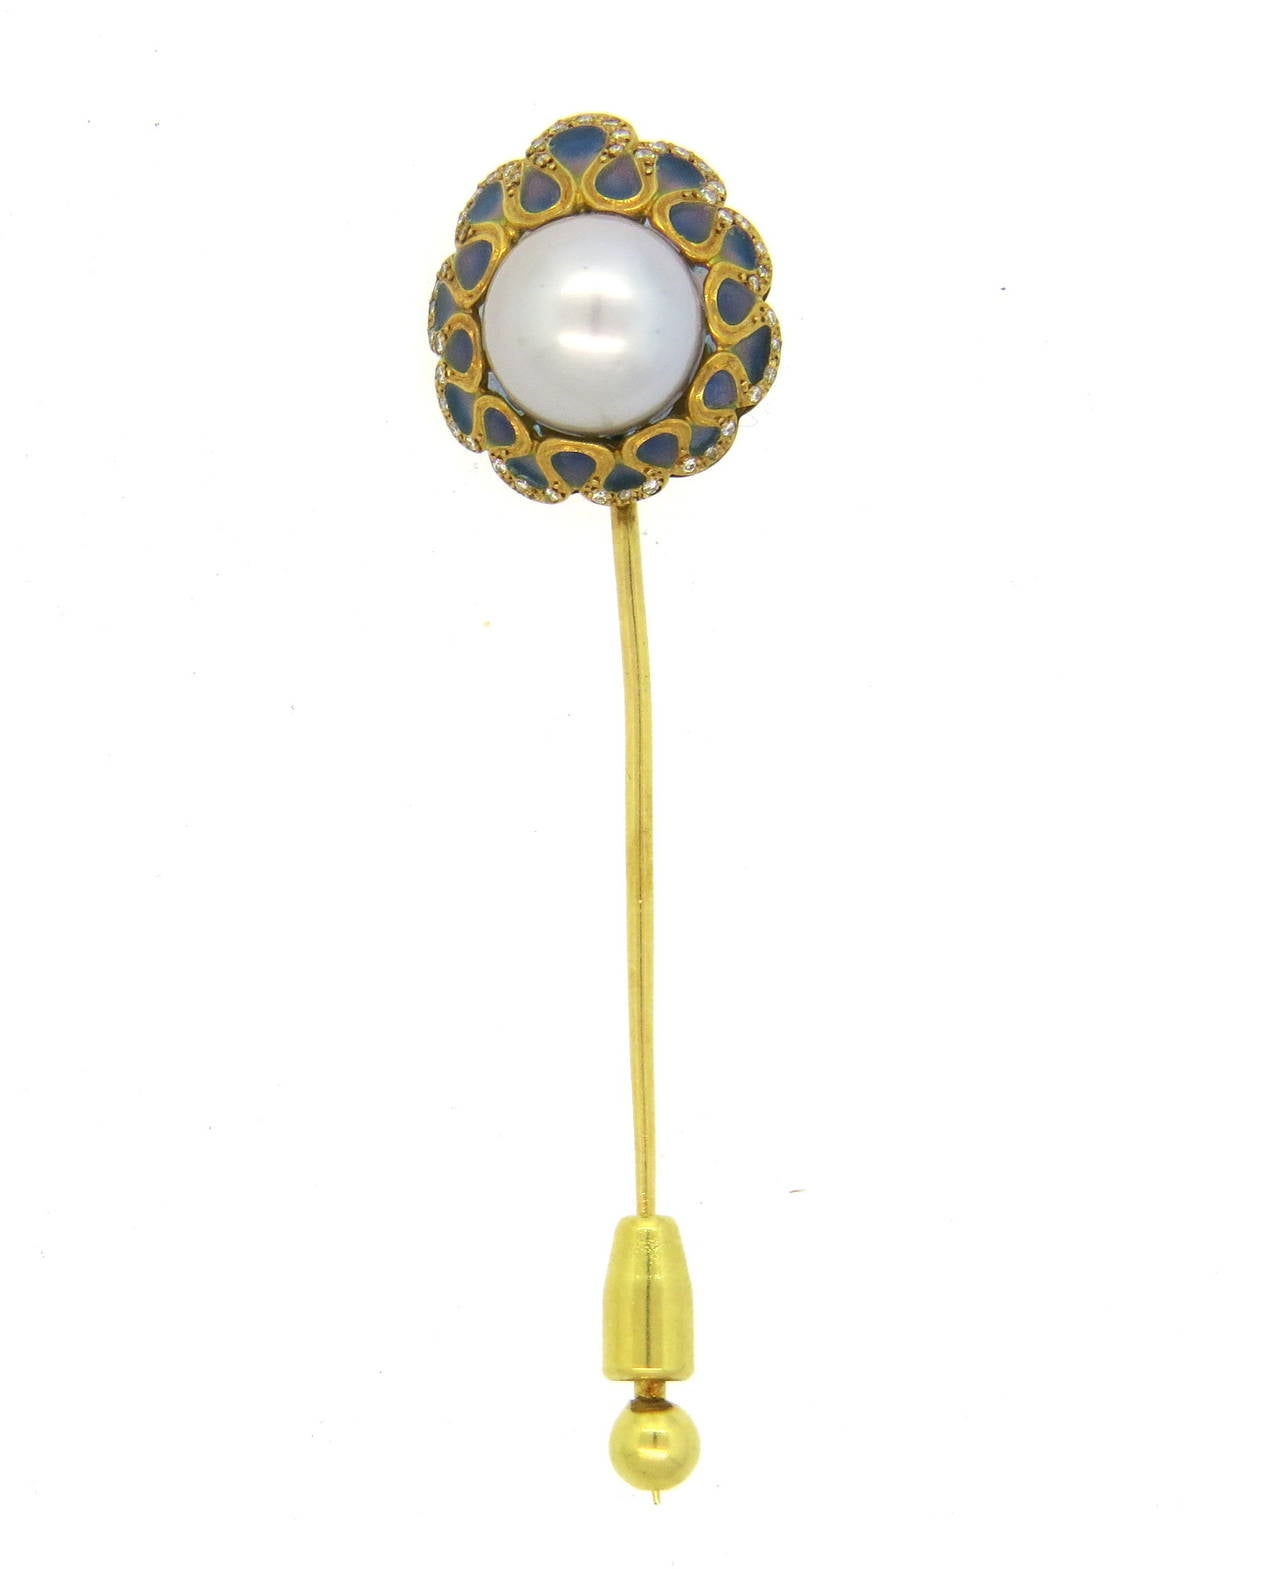 An 18k yellow gold stick pin adorned with plique a jour enamel, approximately 0.08ctw of H/VS diamonds and a South Sea pearl measuring 12.5mm in diameter.  The head of the pin measures 20mm x 24mm.  The weight of the piece is 11.2 grams.